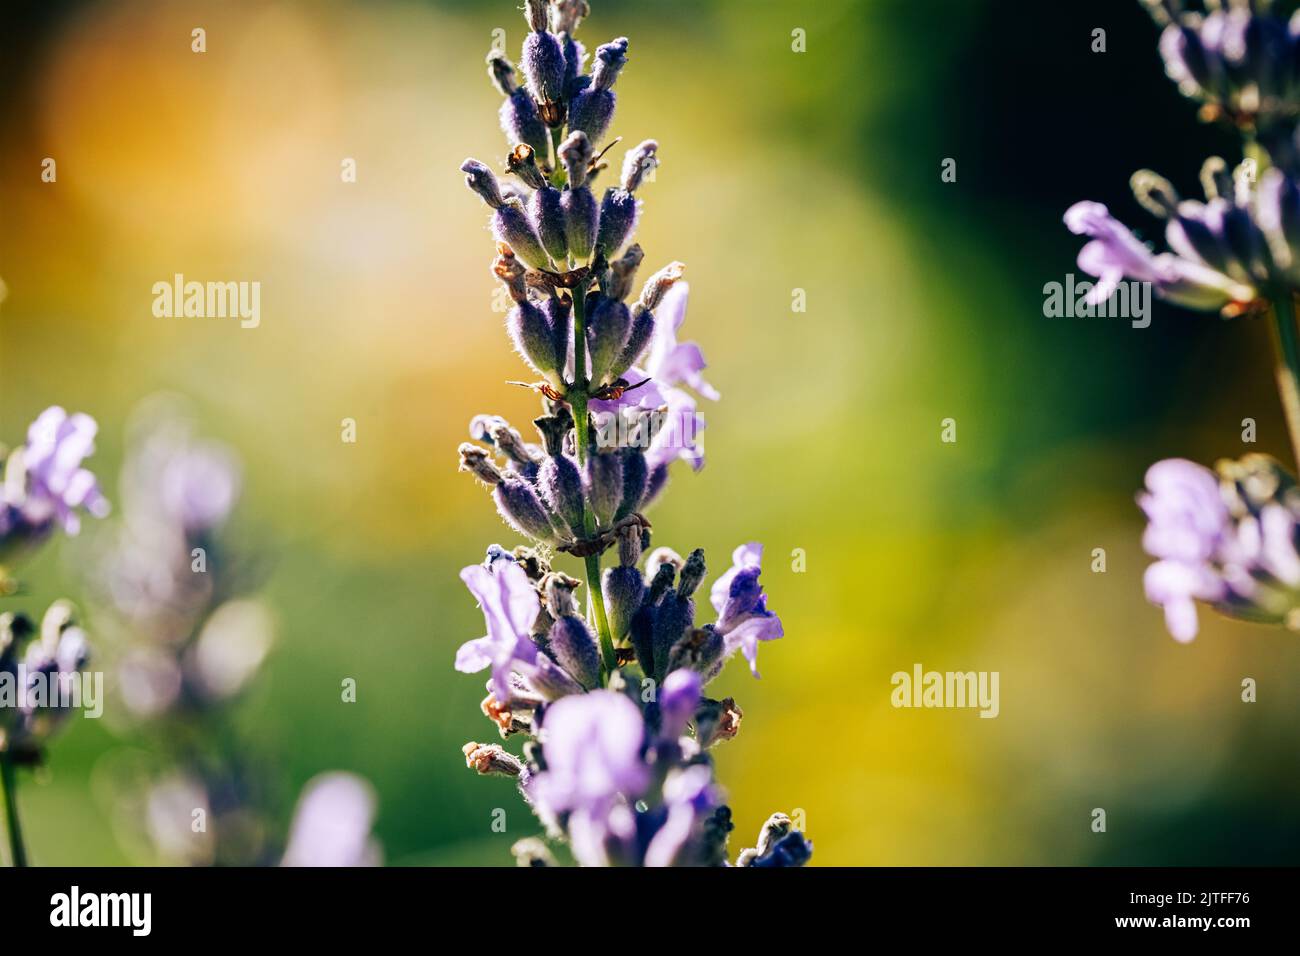 Grass twig with small flowers bloom on stem. Flowers Veronica spiky perennial herbaceous plant, species of genus Veronica, Plantain family. Abstract f Stock Photo